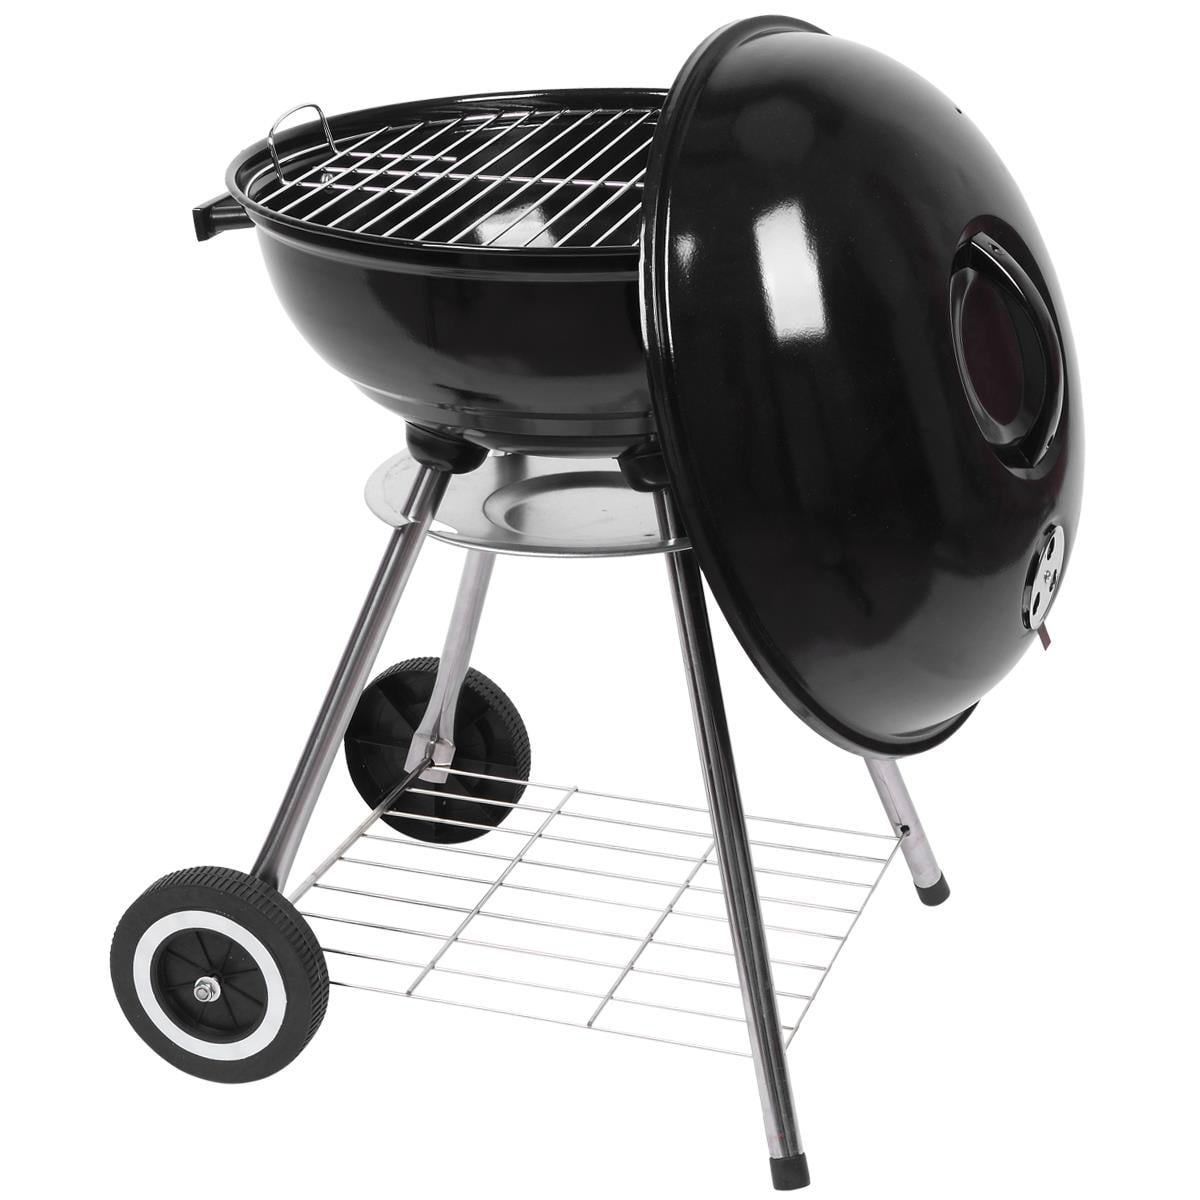 Vebreda Outdoor BBQ Grill Charcoal Barbecue Pit Backyard Meat Cooker Smoker